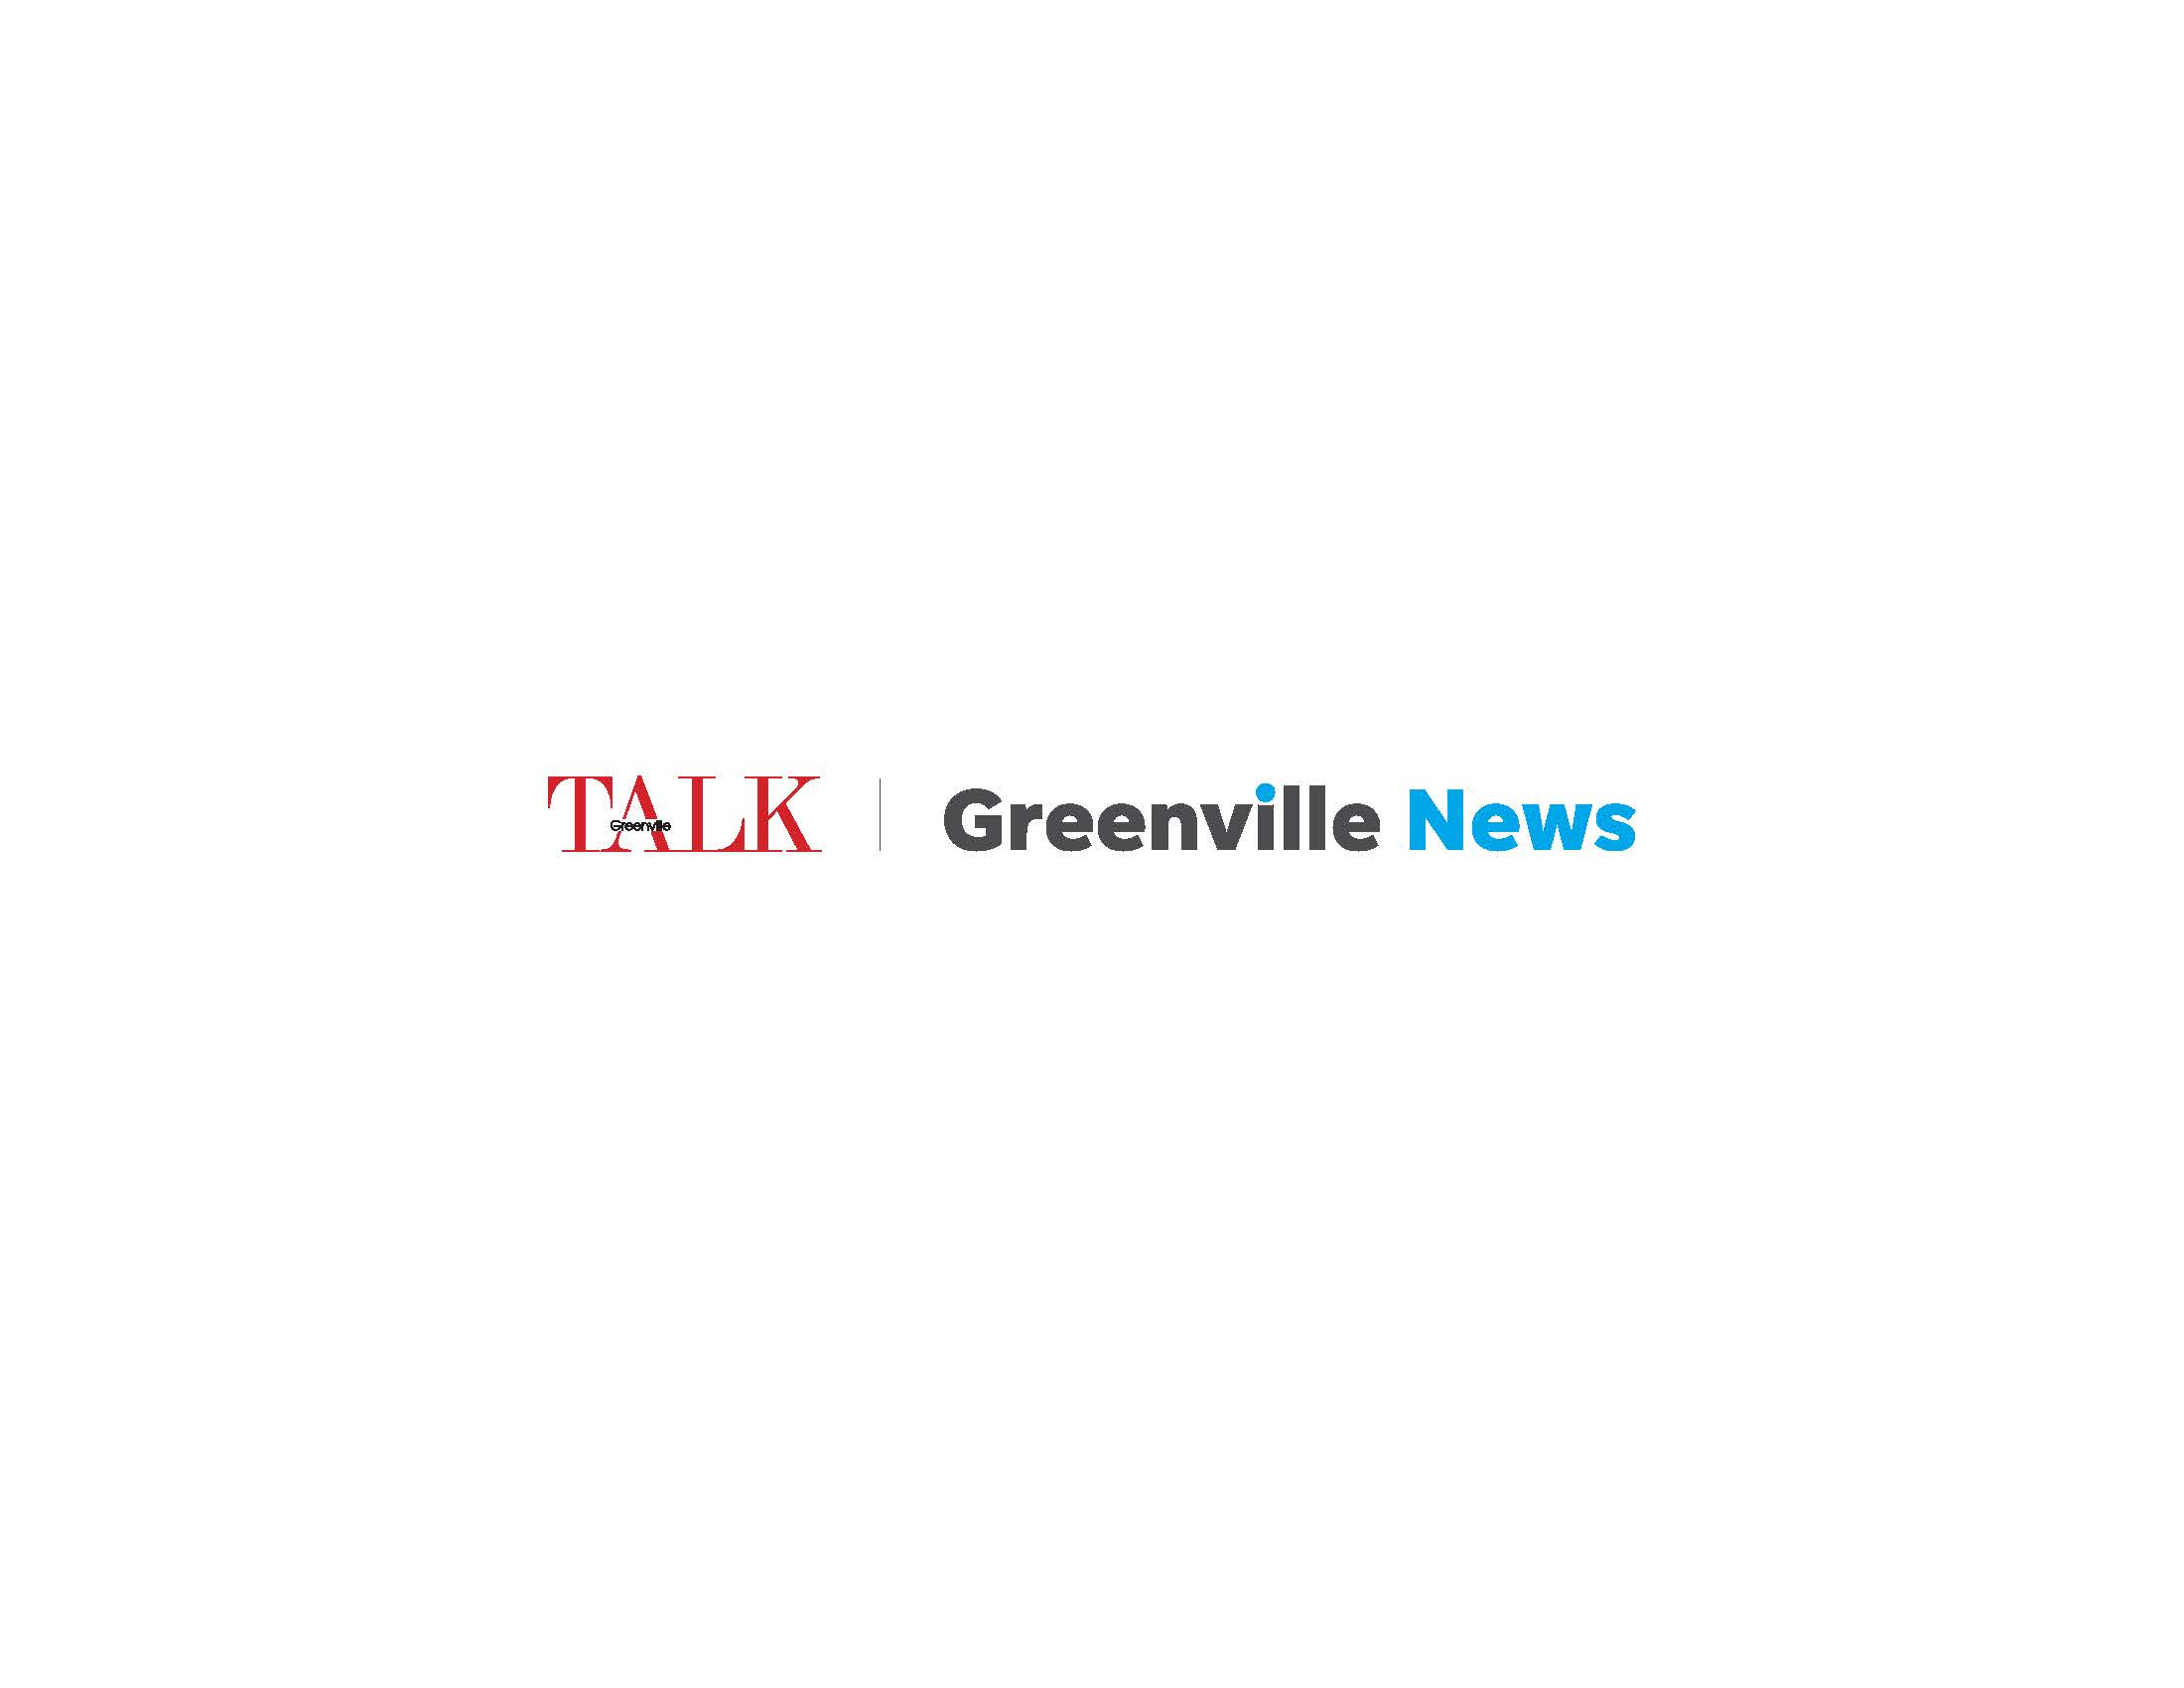 The Greenville News